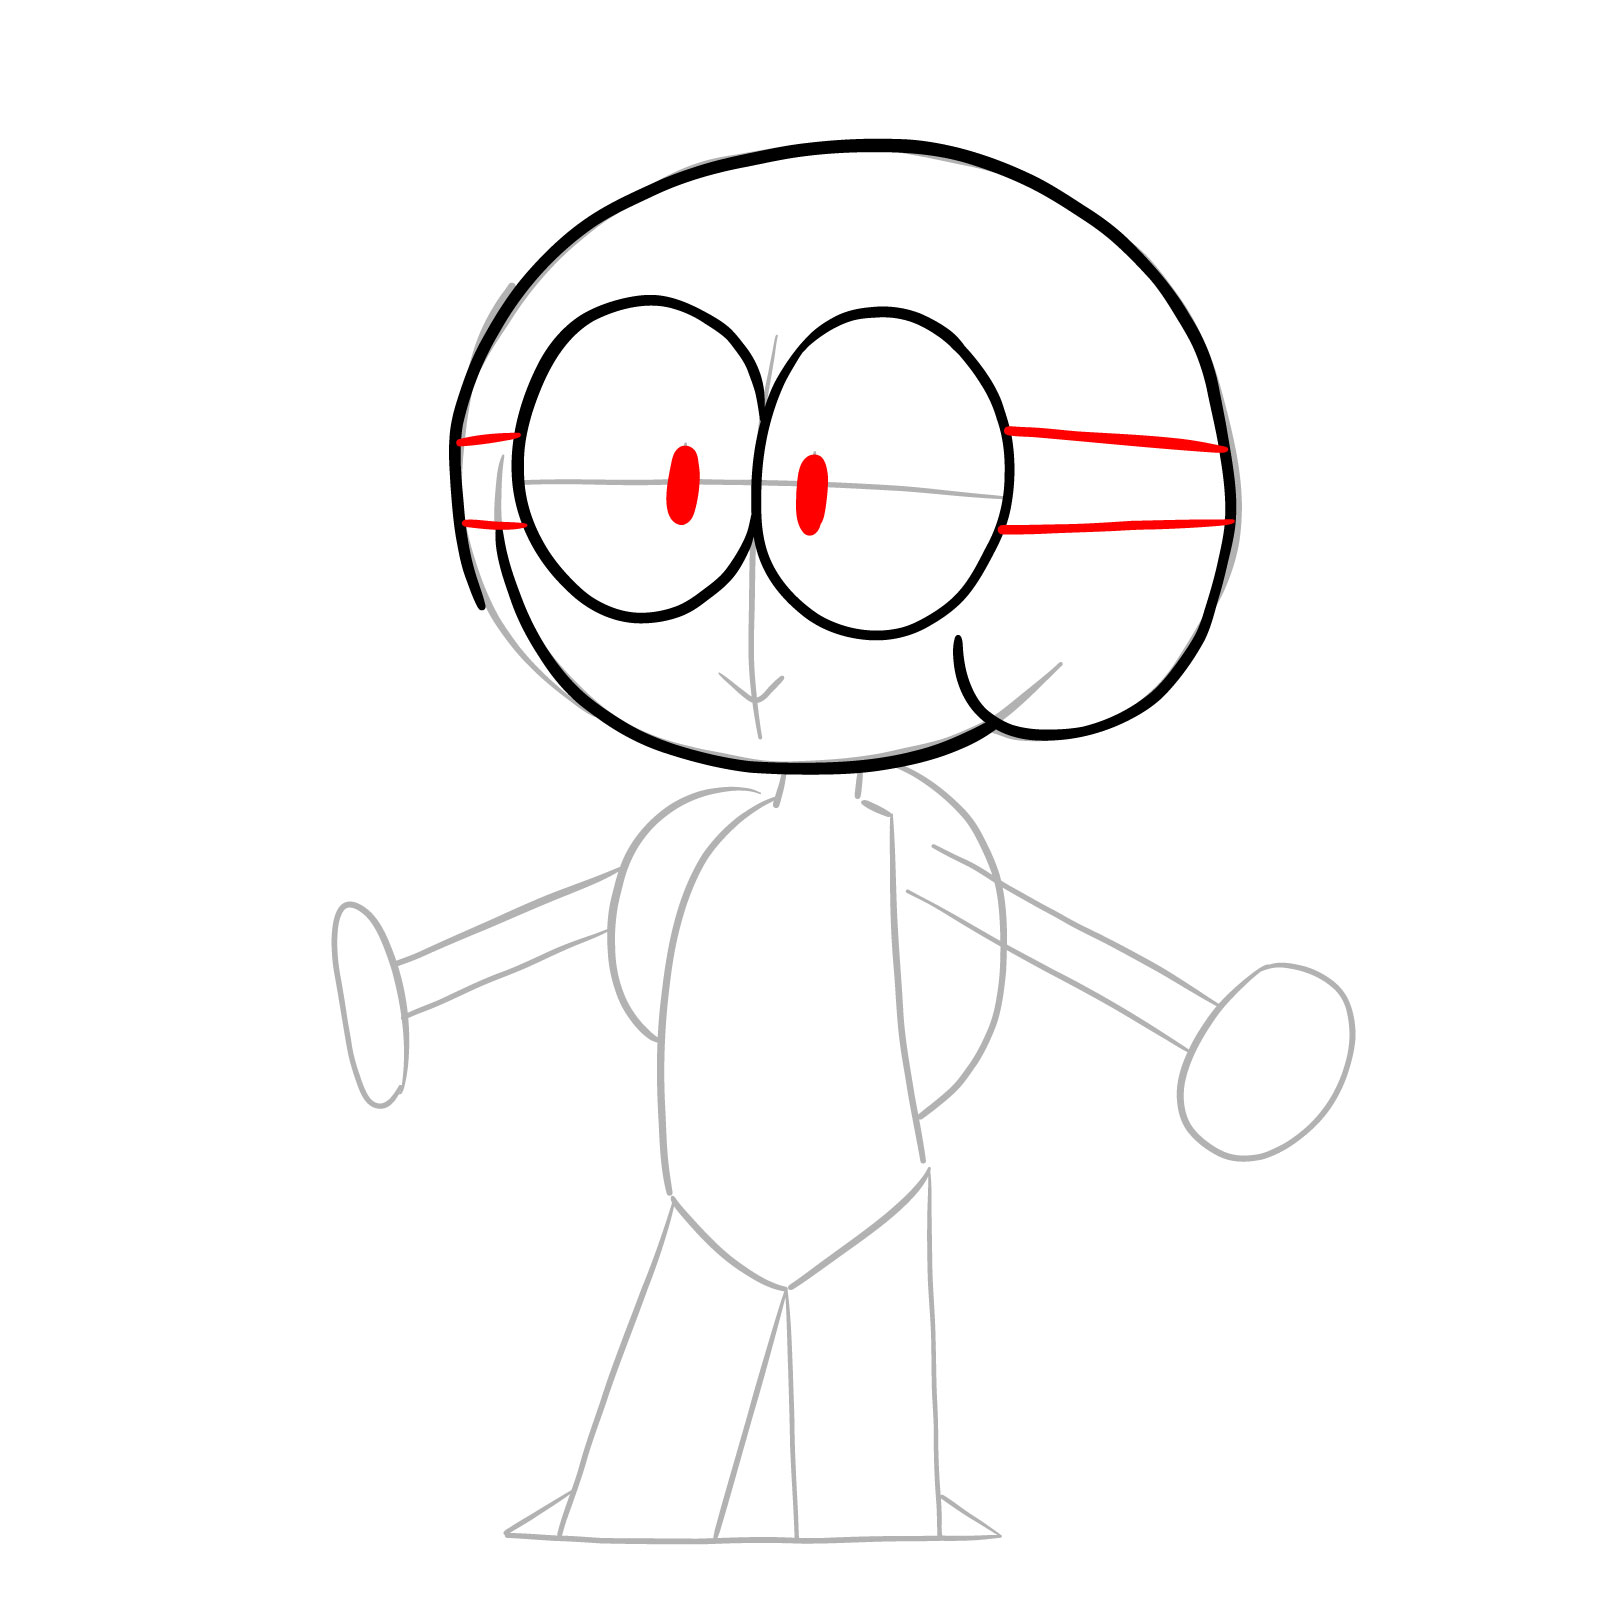 How to draw Dendy from OK K.O.! - step 07